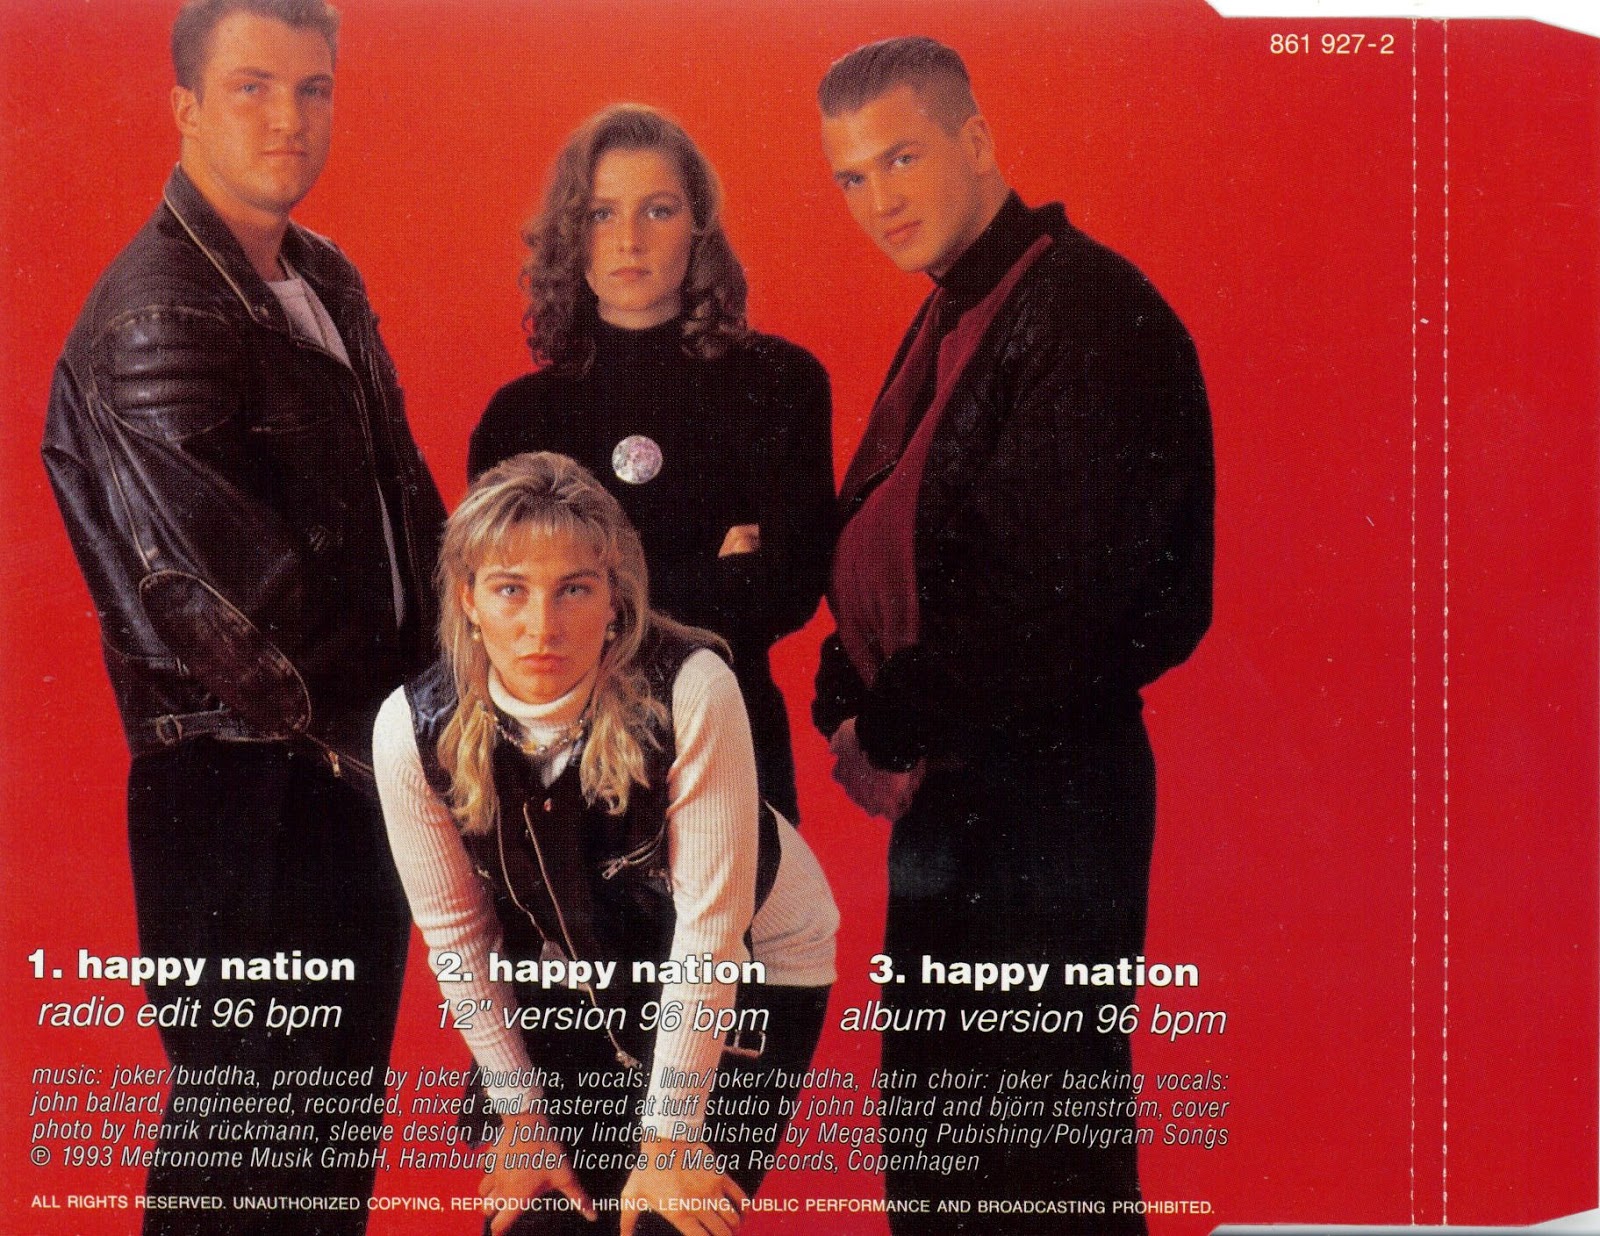 Happy nation год. Ace of Base 1992. Ace of Base Happy Nation альбом. Ace of Base Постер. Линн Берггрен Happy Nation.